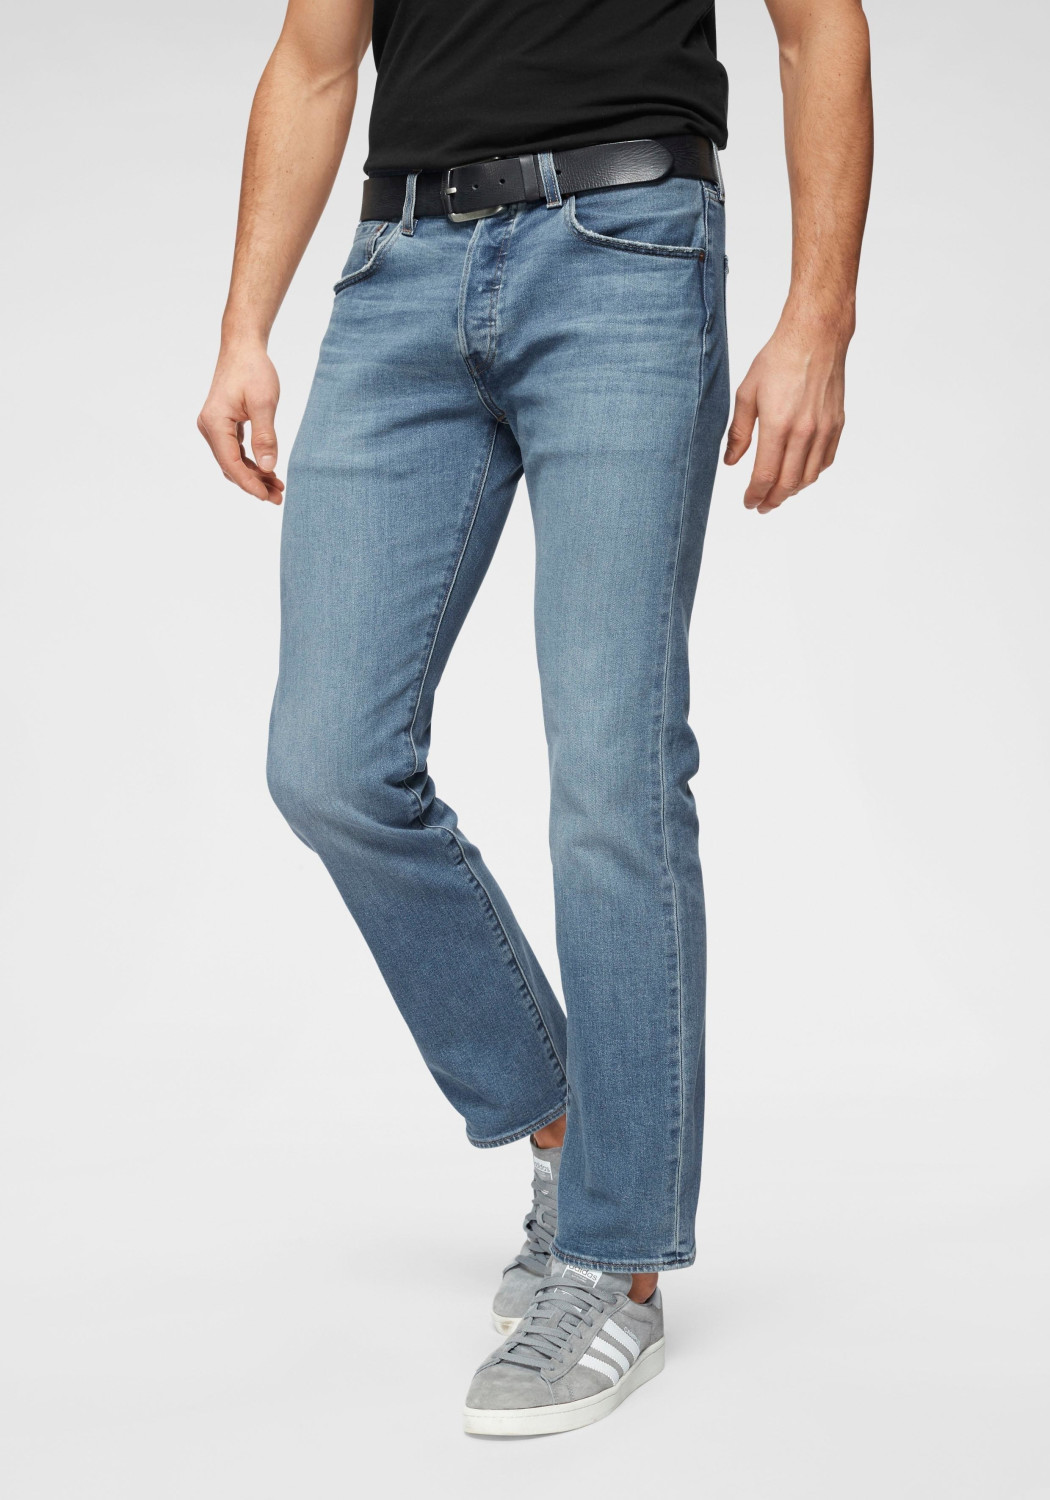 Buy Levi's 501 Original Fit ironwood from £60.84 (Today) – January ...